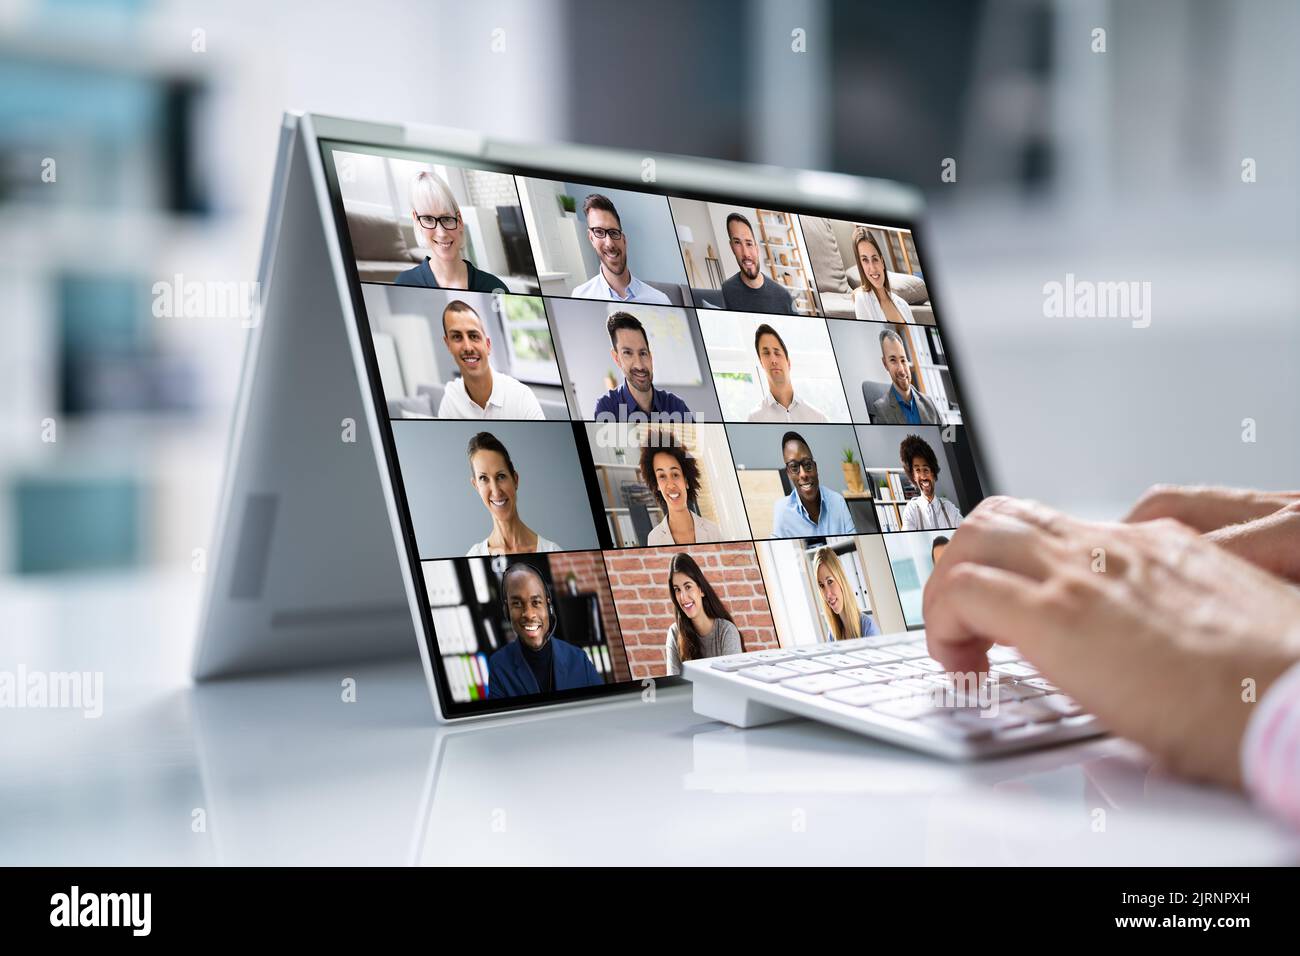 Video Conference Work Webinar Online At Home Stock Photo